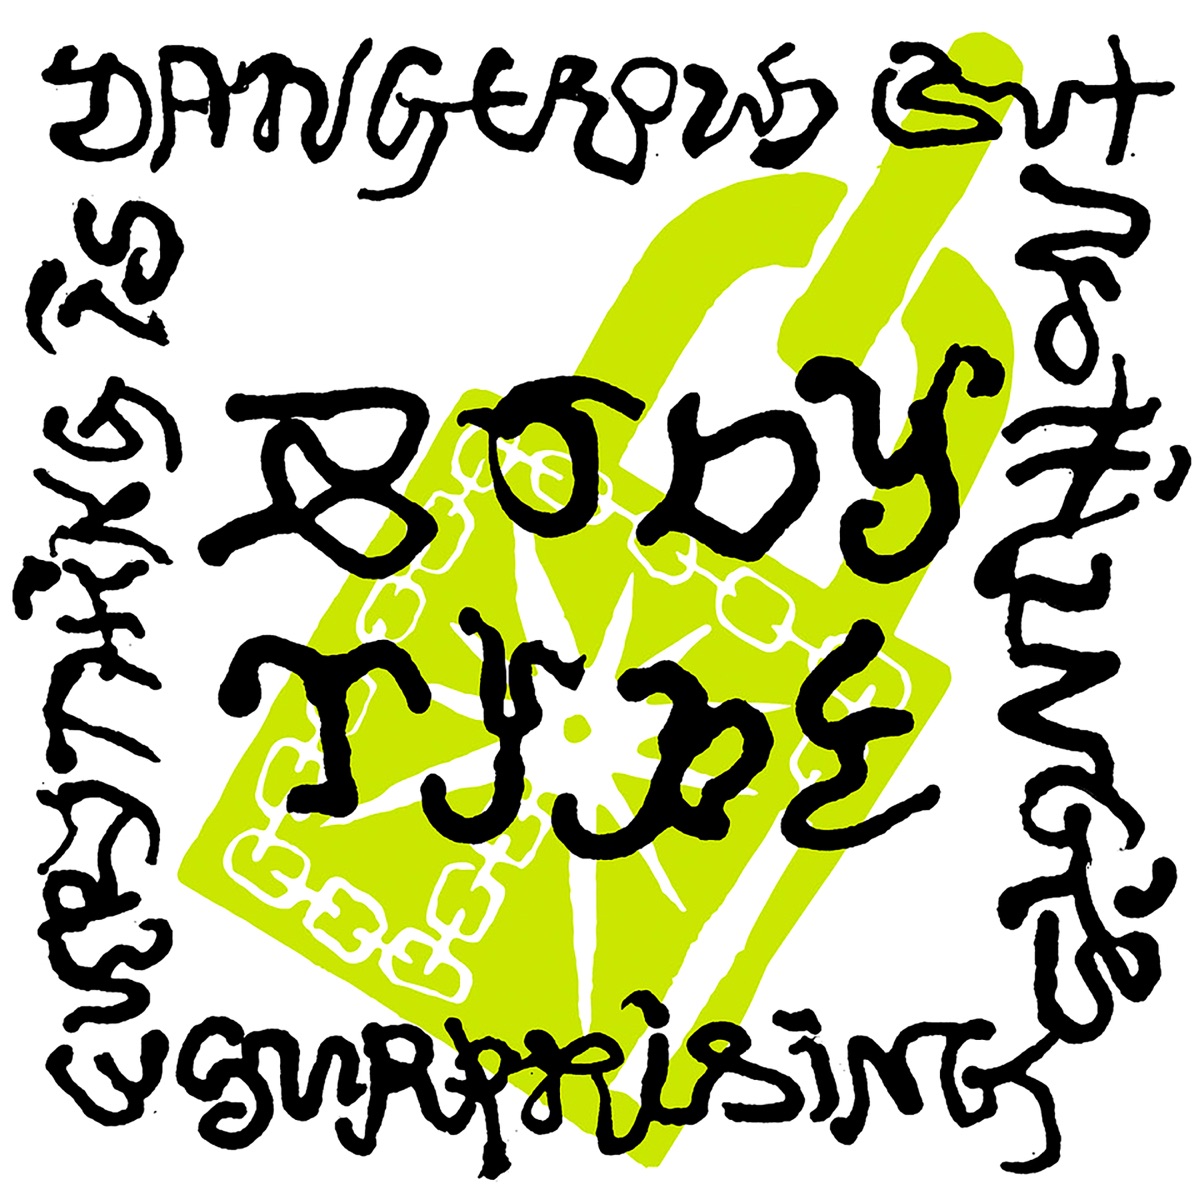 Body Type - Everything Is Dangerous But Nothing's Surprising